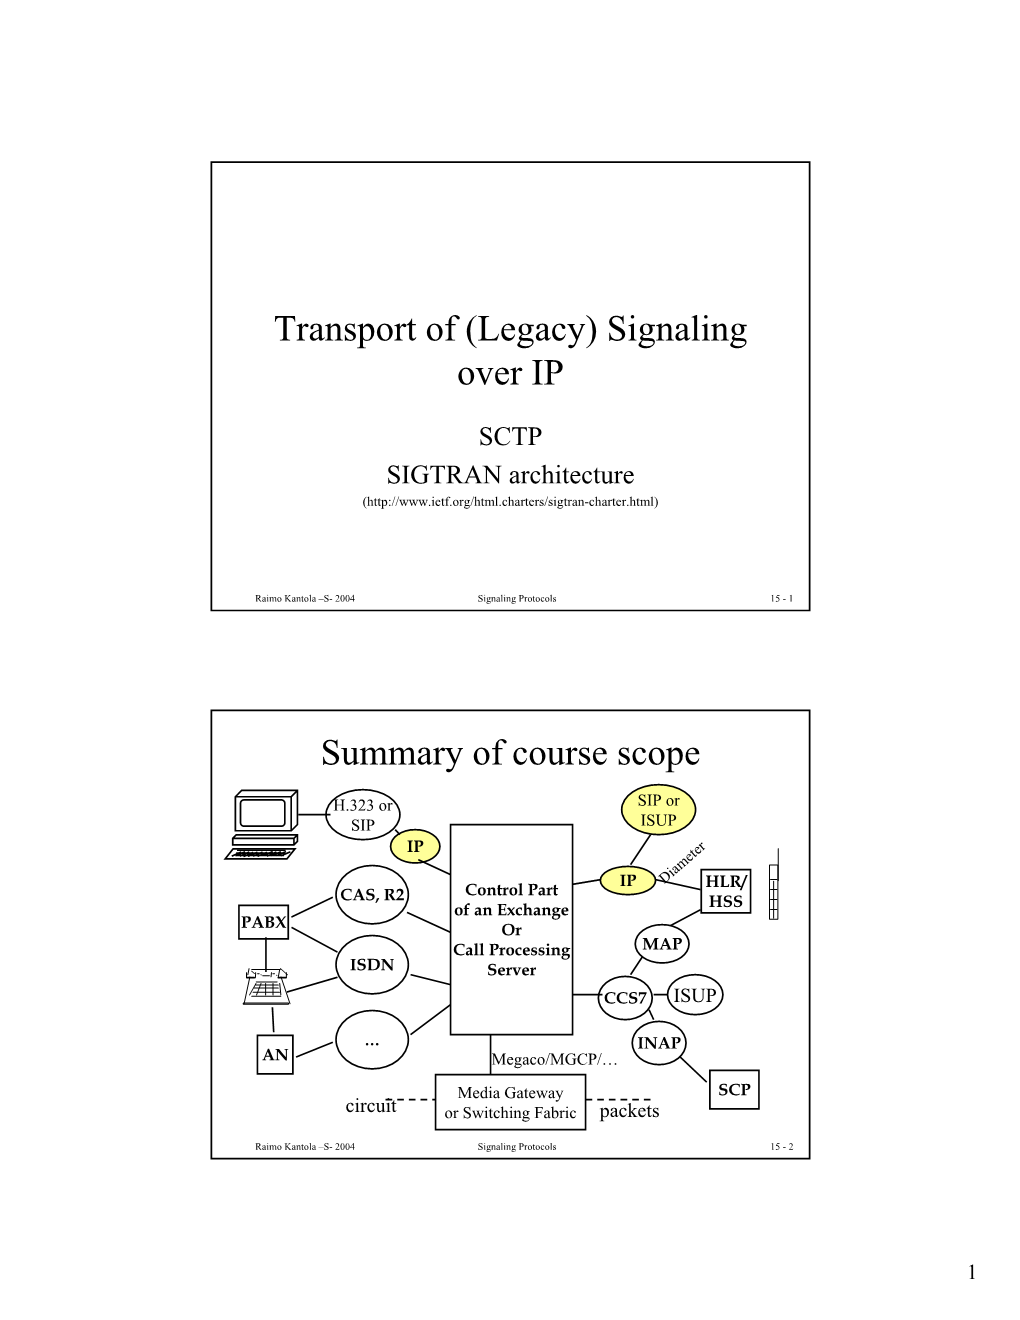 Transport of (Legacy) Signaling Over IP Summary of Course Scope